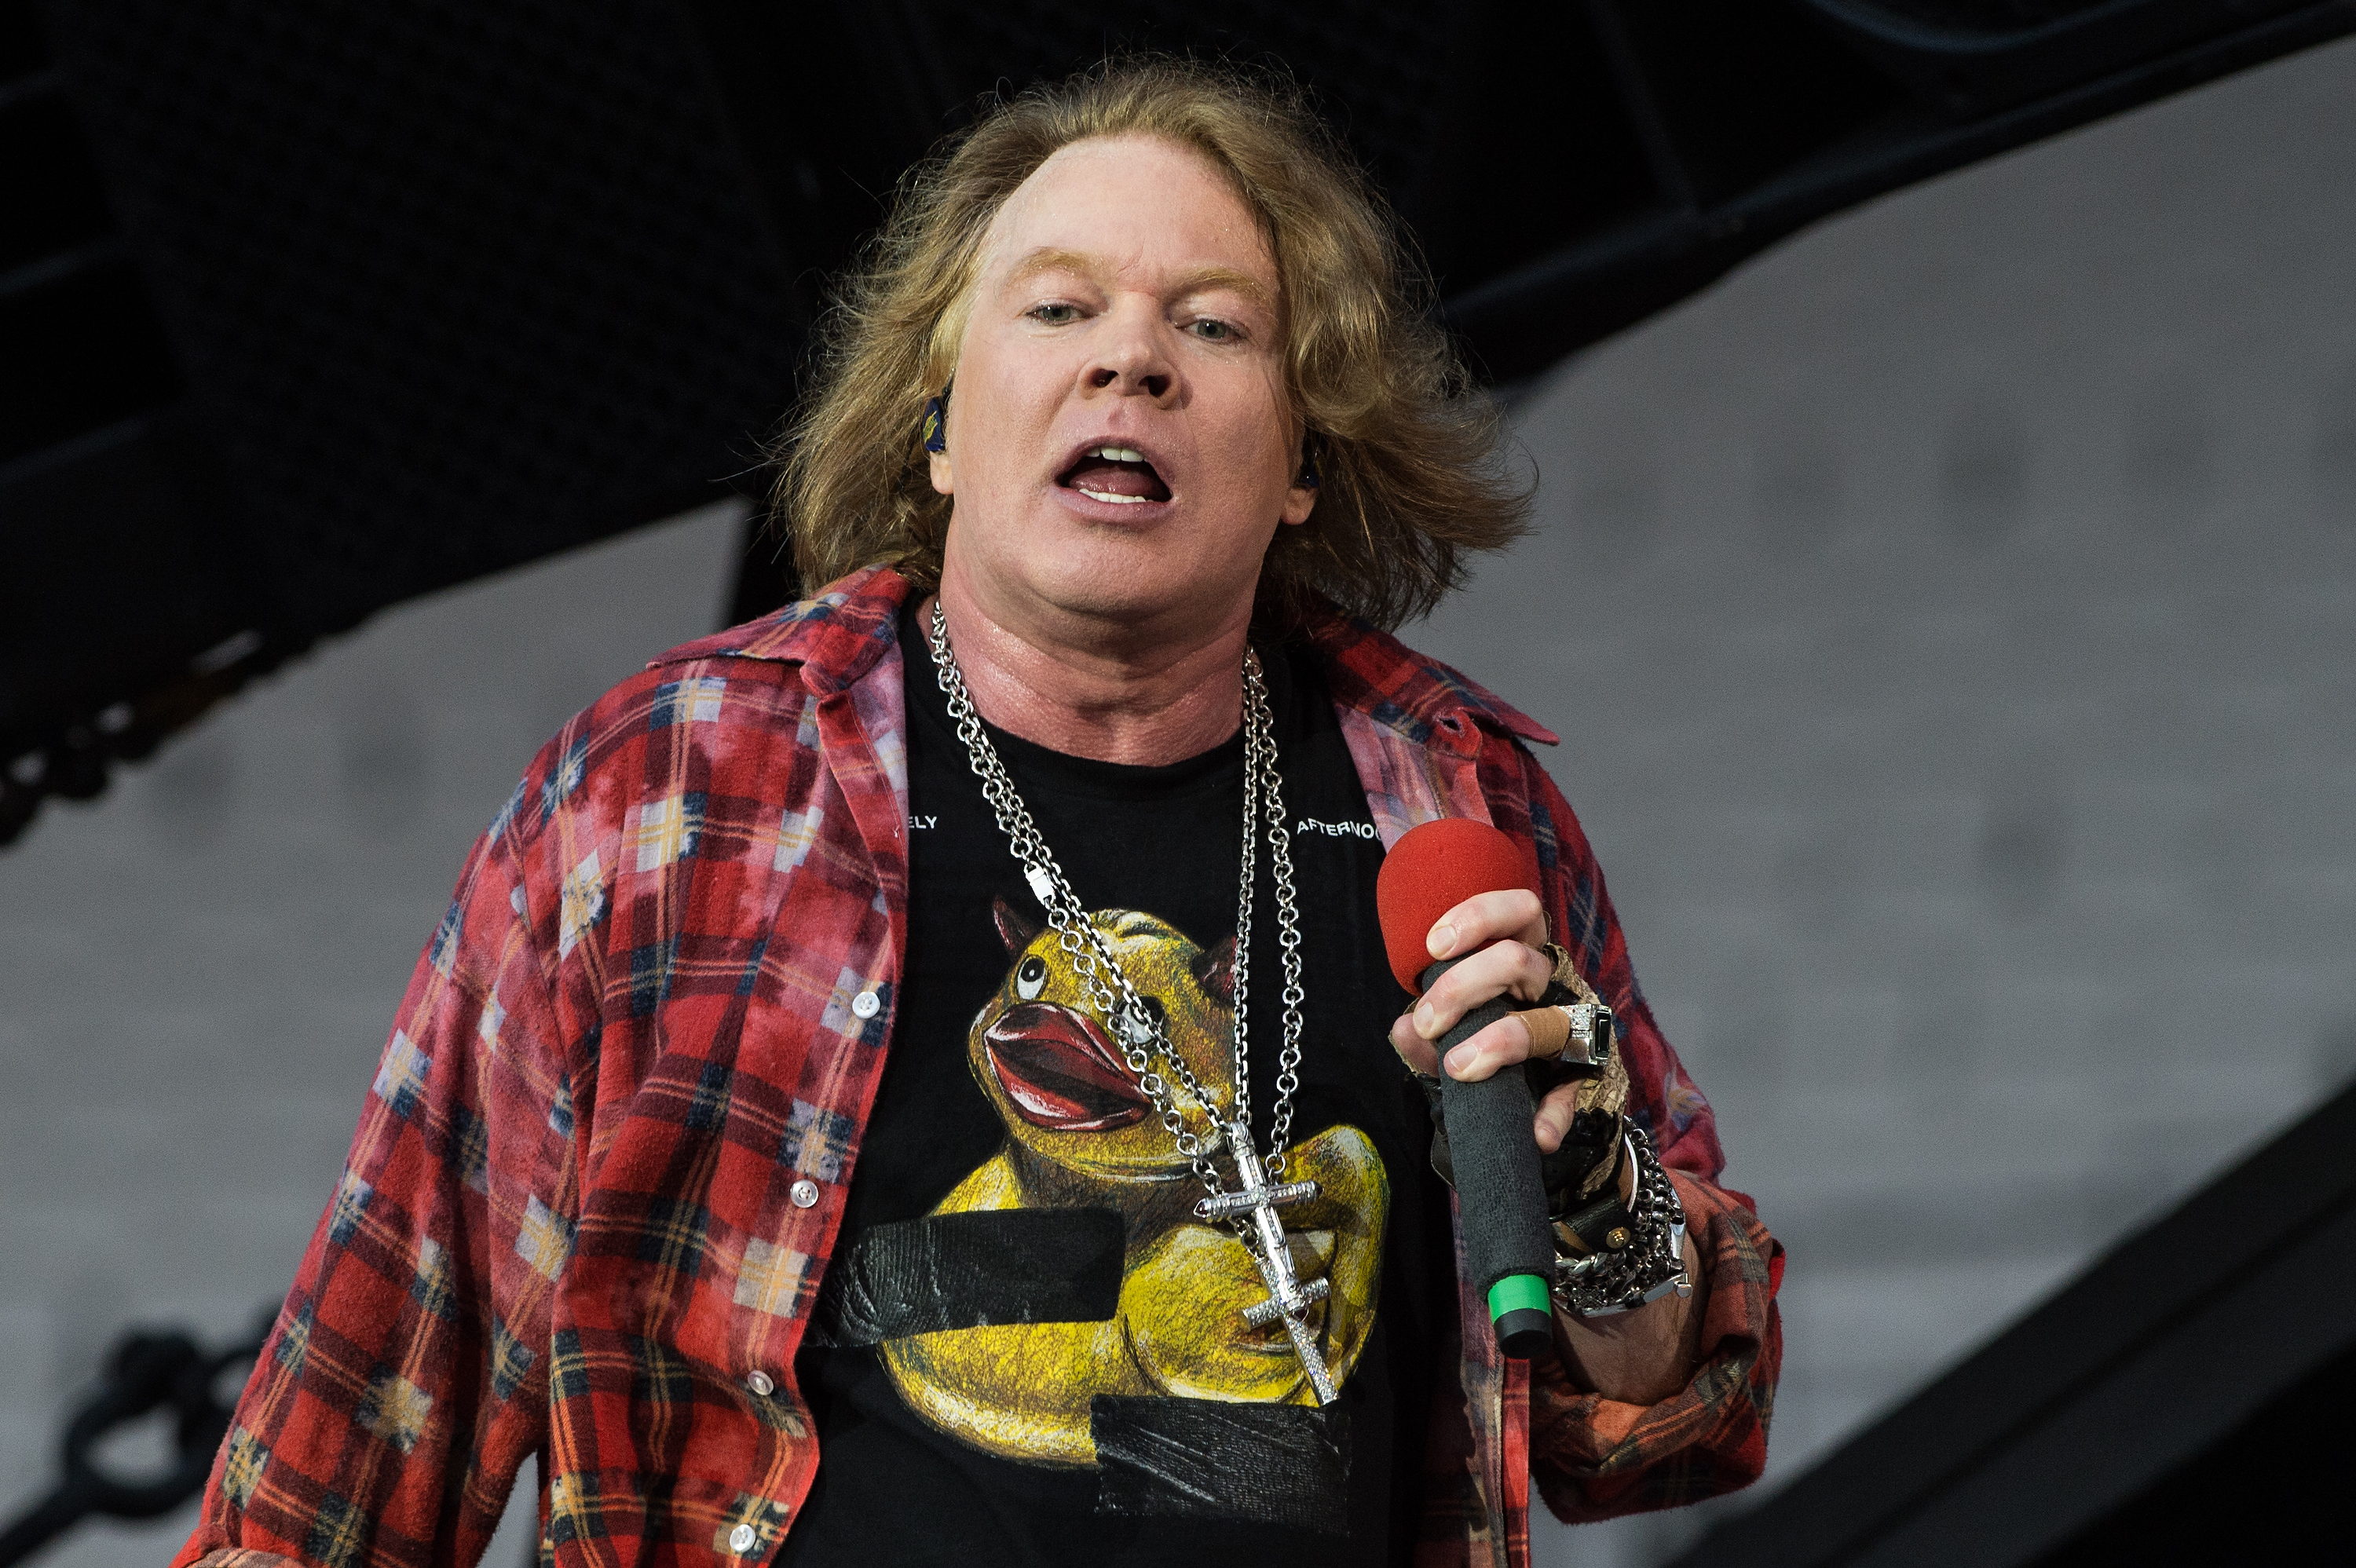 Axl Rose Tests The Streisand Effect By Demanding Google Removes Fat Photos ...